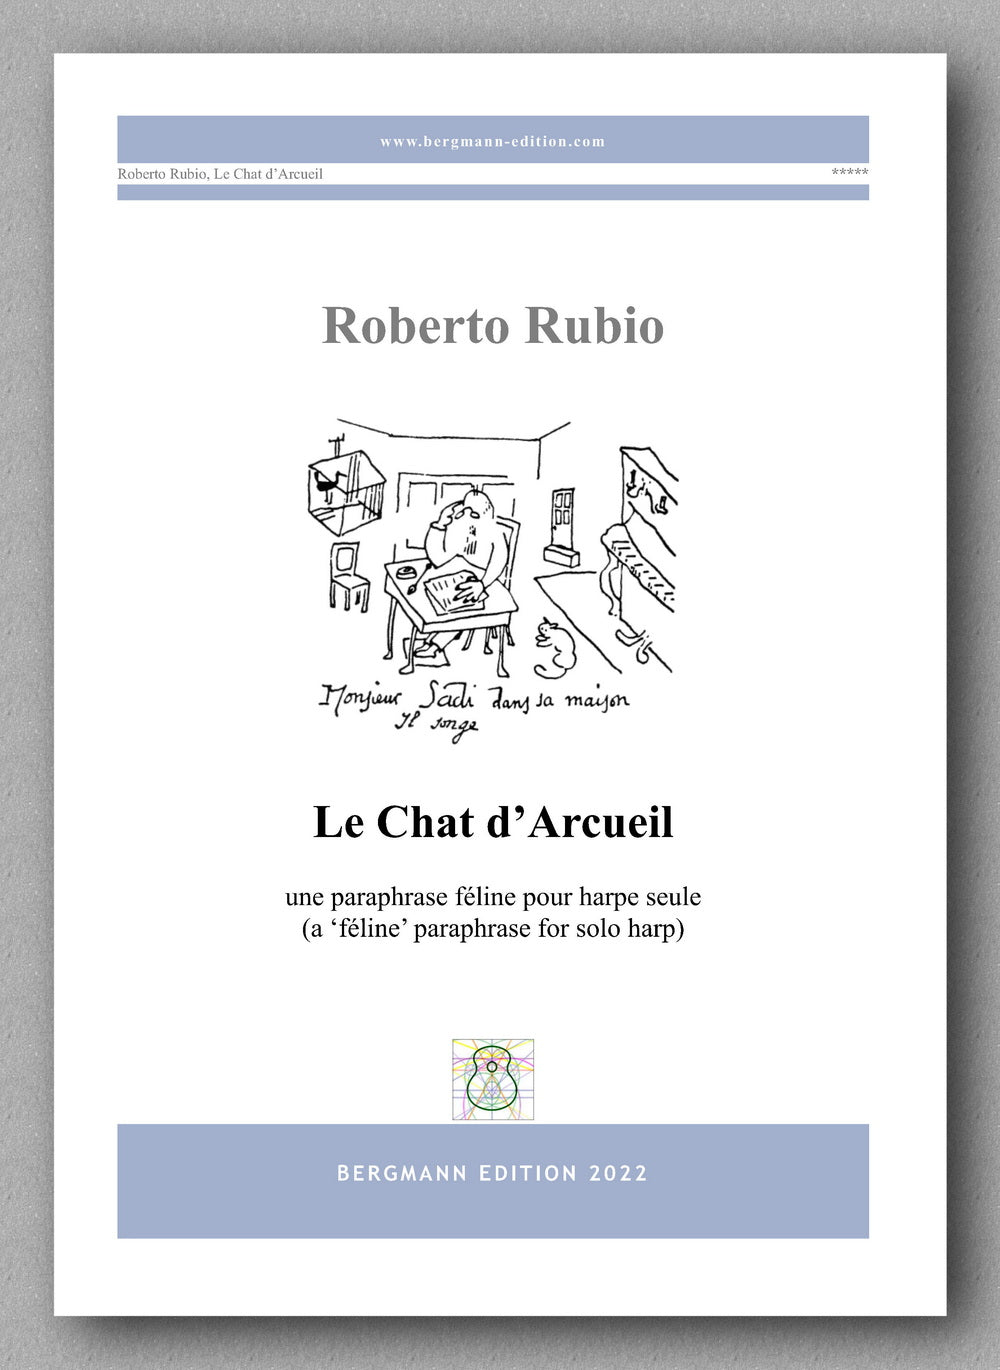 Le Chat d’Arcueil, by Roberto Rubio - cover